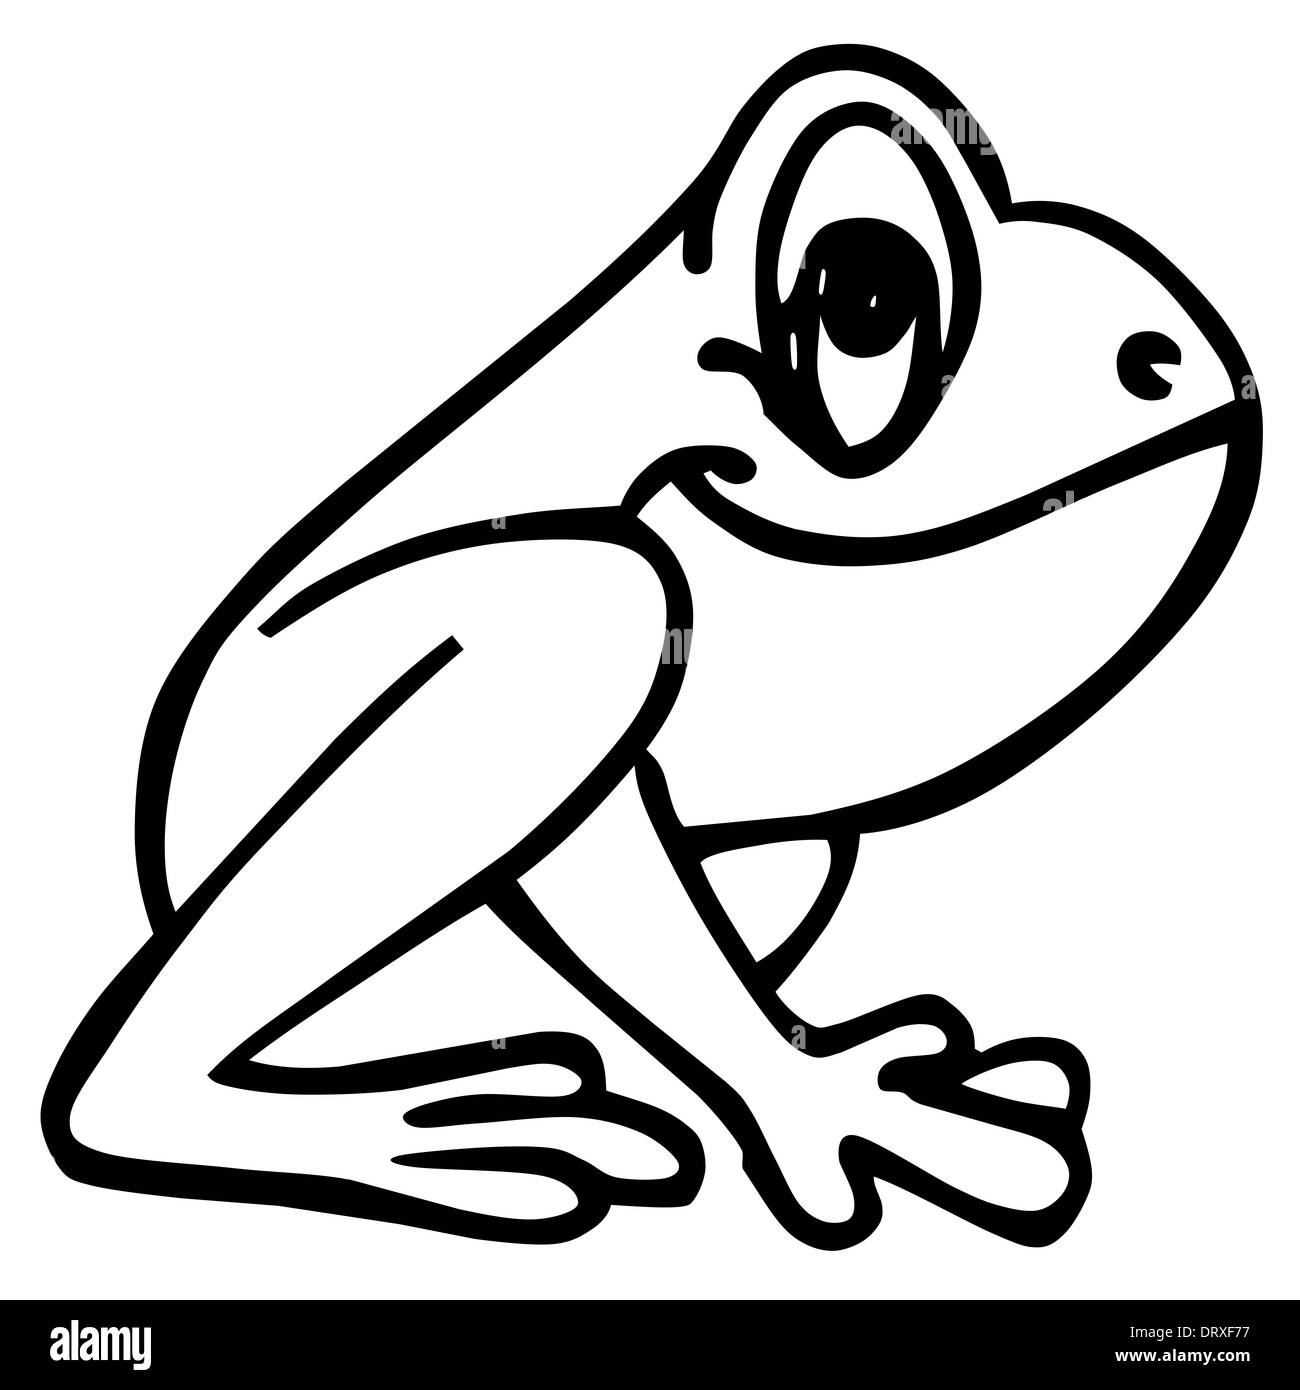 Illustration frog sitting and looking at the top. Stock Photo